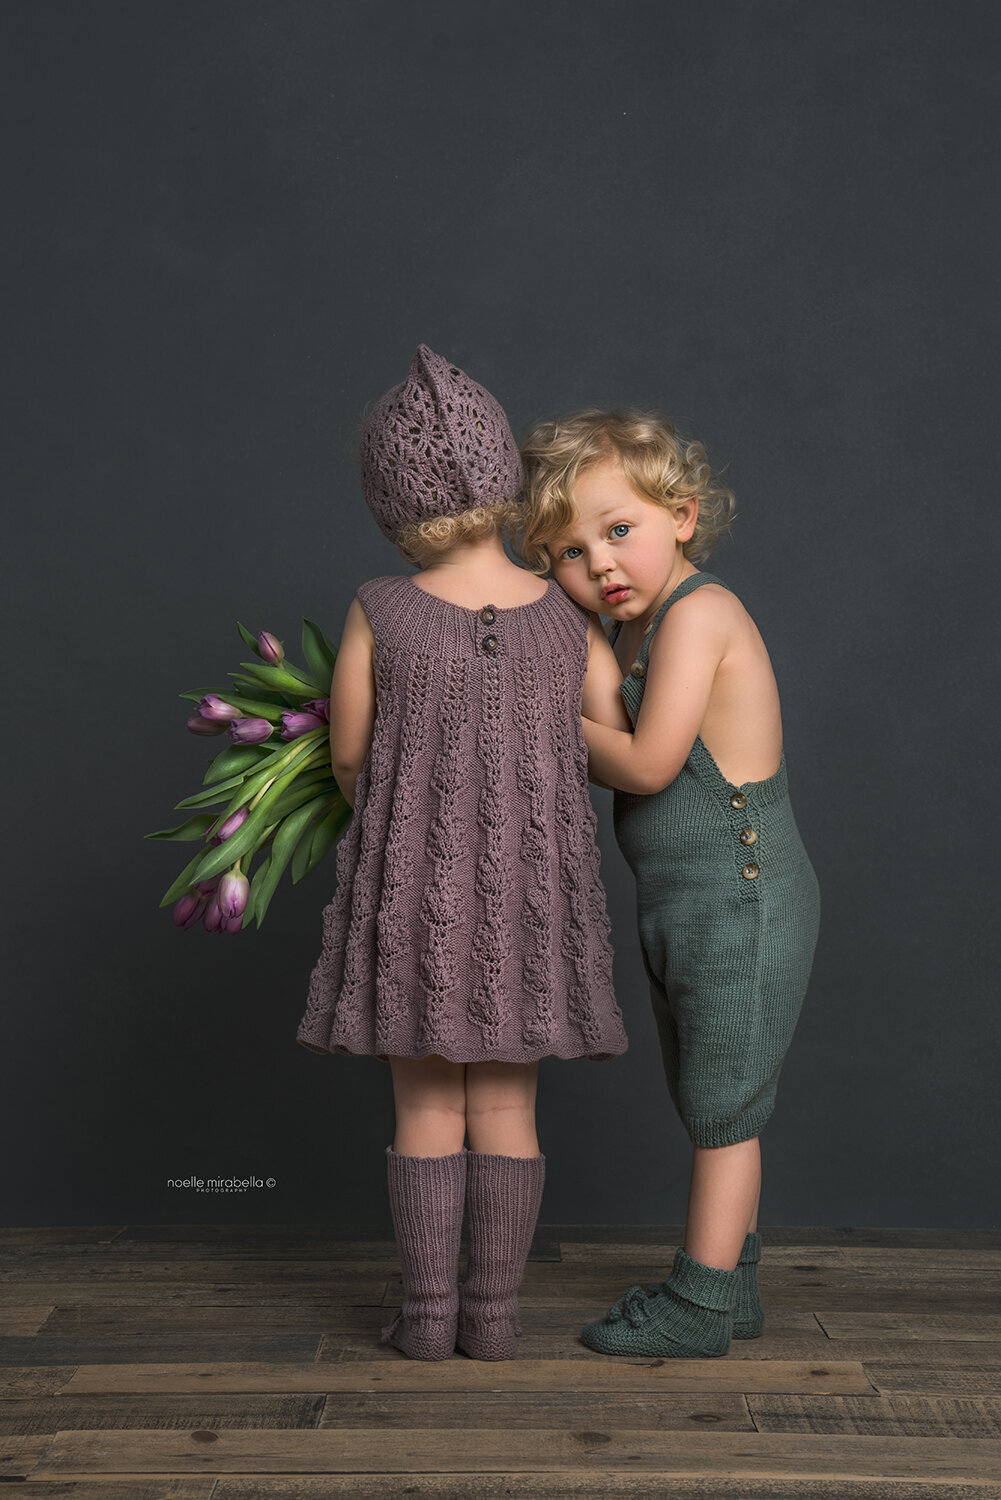 Children snuggles togther wearing handmade knits clothing.